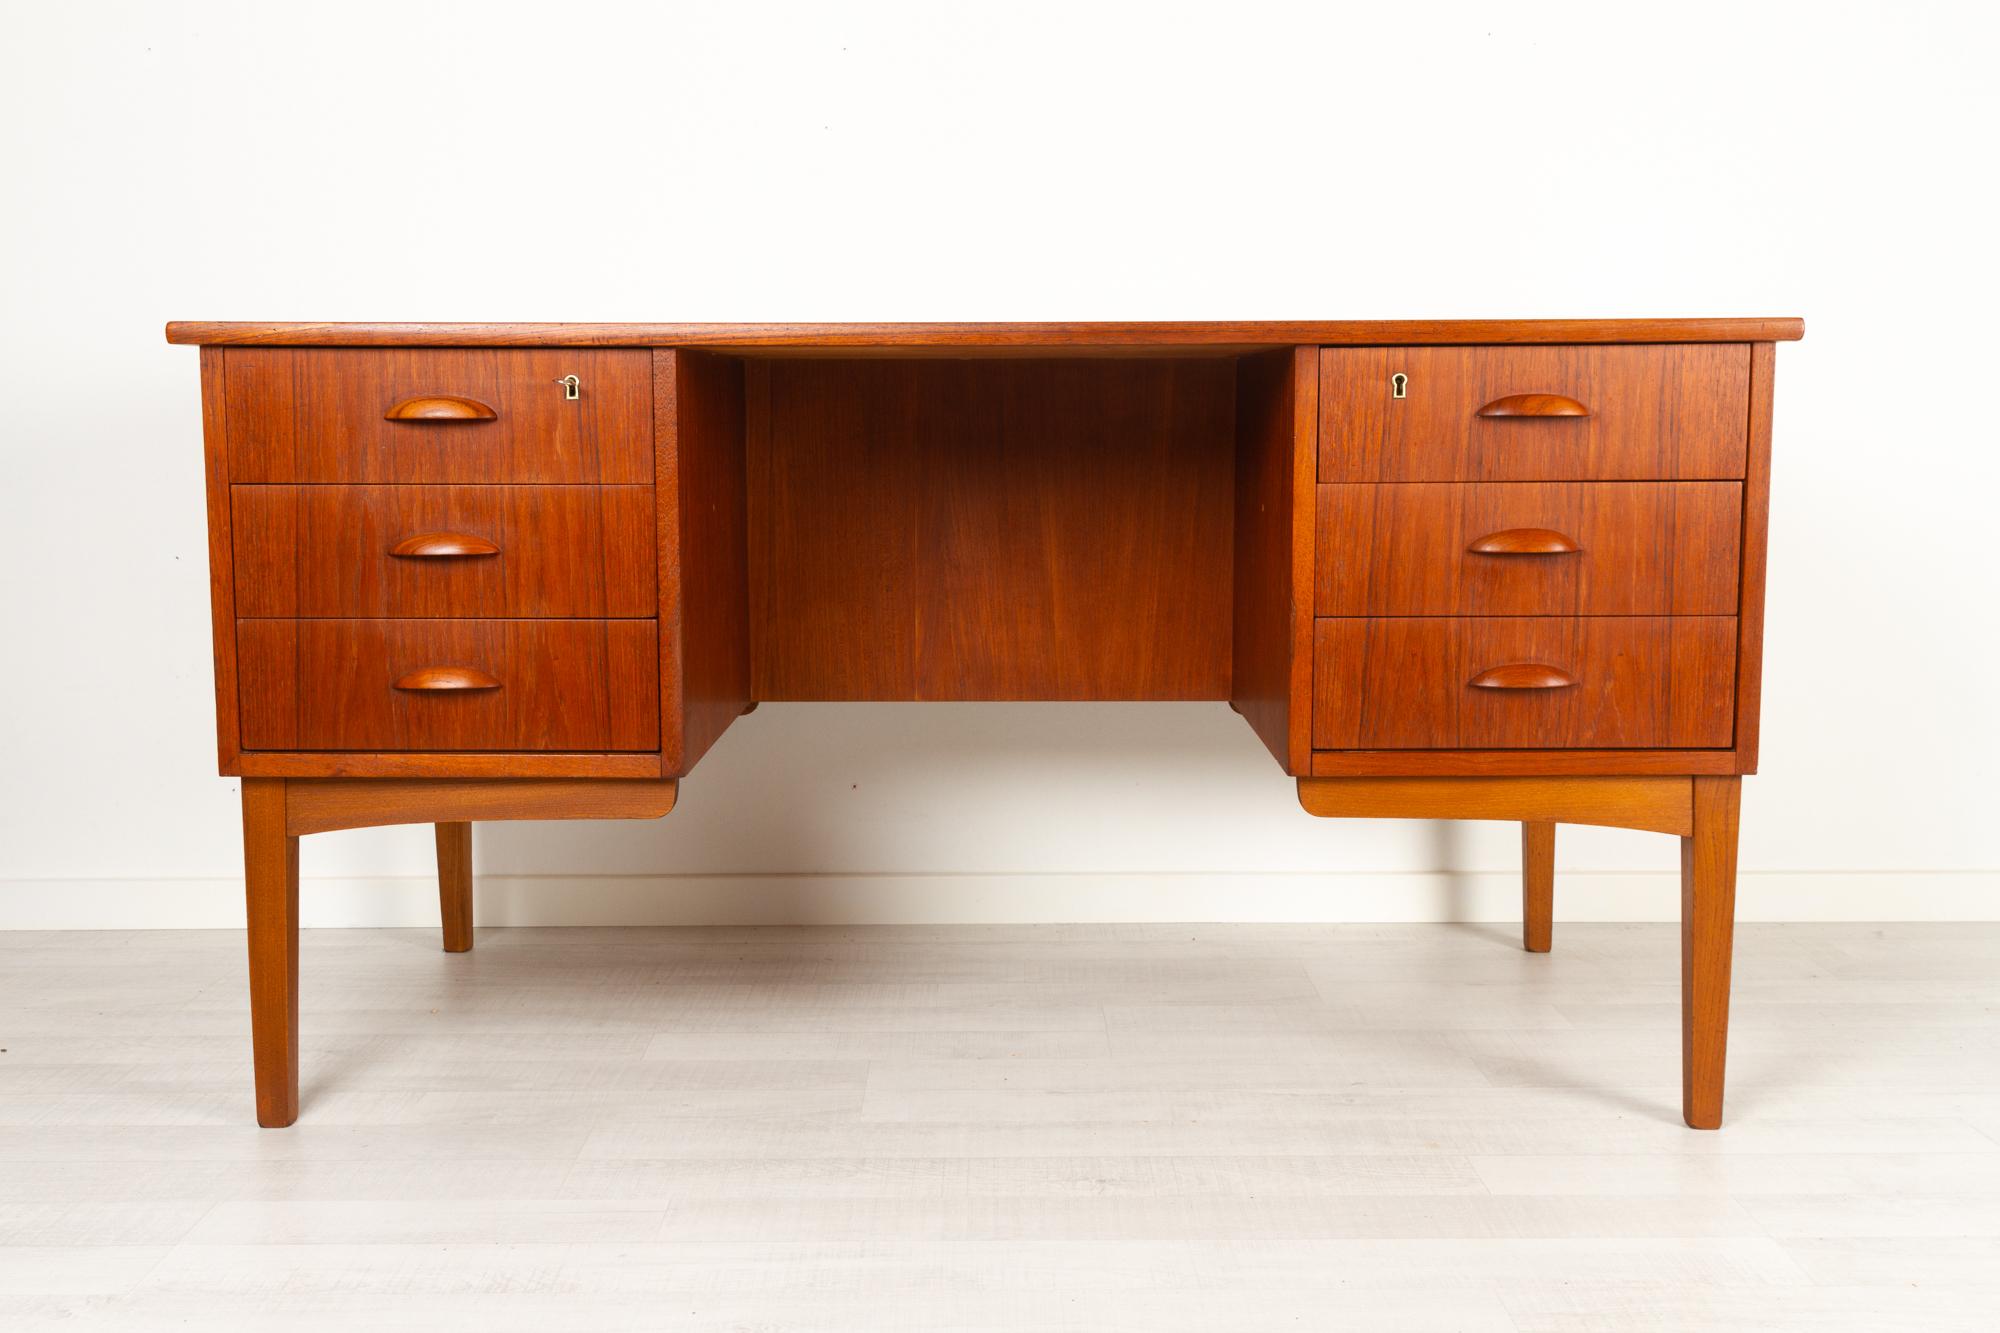 Vintage Danish teak desk 1960s
Elegant and Classic Danish Mid-Century Modern freestanding writing desk in teak with oak legs. Front with six drawers, two with lock. Halfmoon shaped drawer pulls in solid teak. Backside with open height adjustable